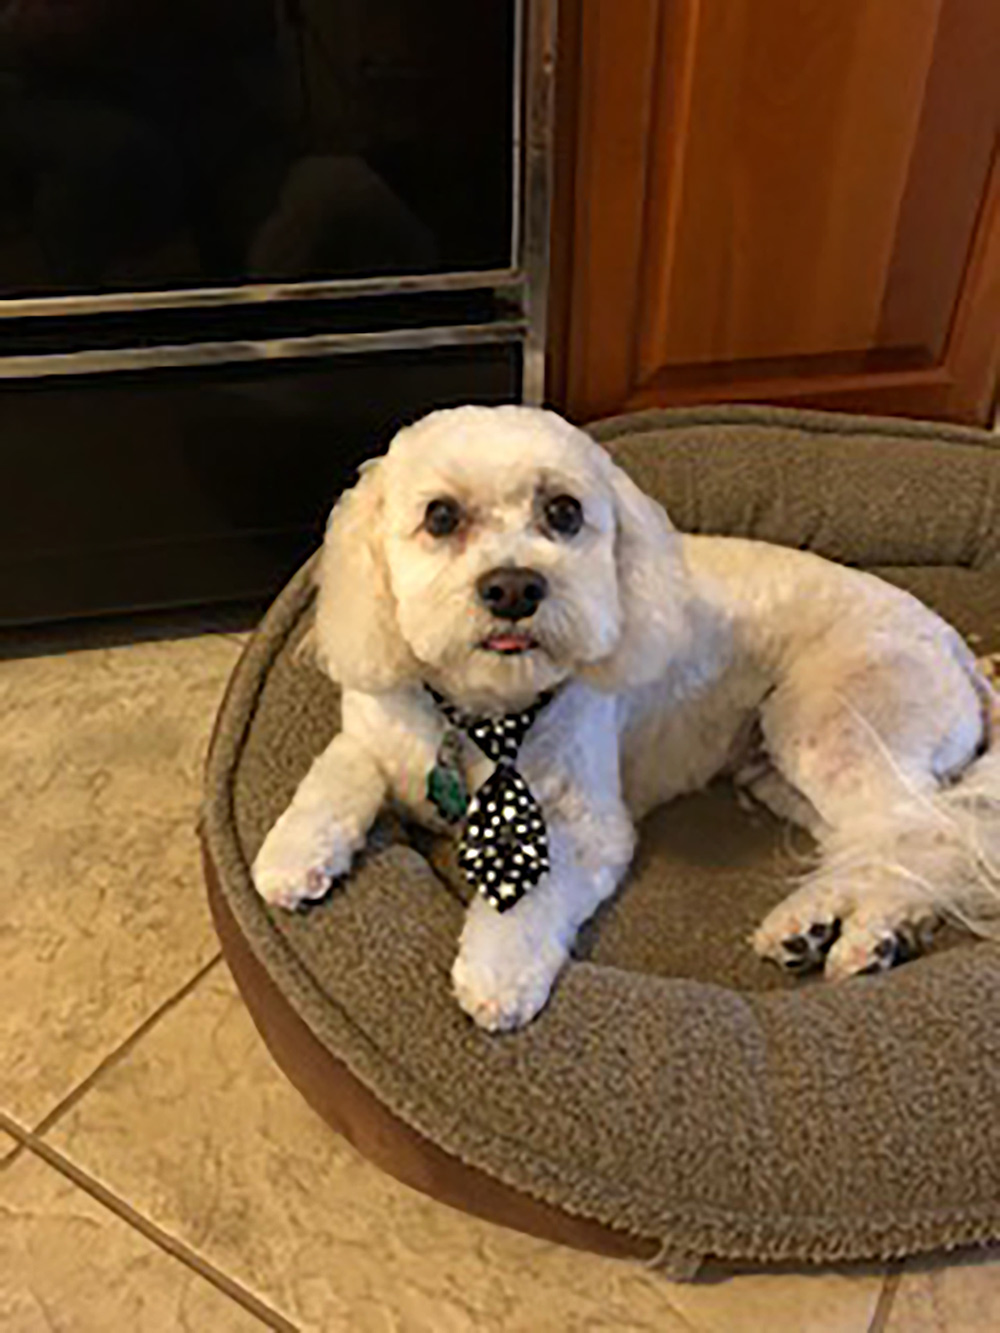 Meet Jake. Charlene G., via email, calls him The Perfect Pet – he is a Cavachon – a mix of Cavalier King Charles Spaniel and Bichon Frise. Completely cute, Jake looks right at home on his comfy bed in the kitchen!